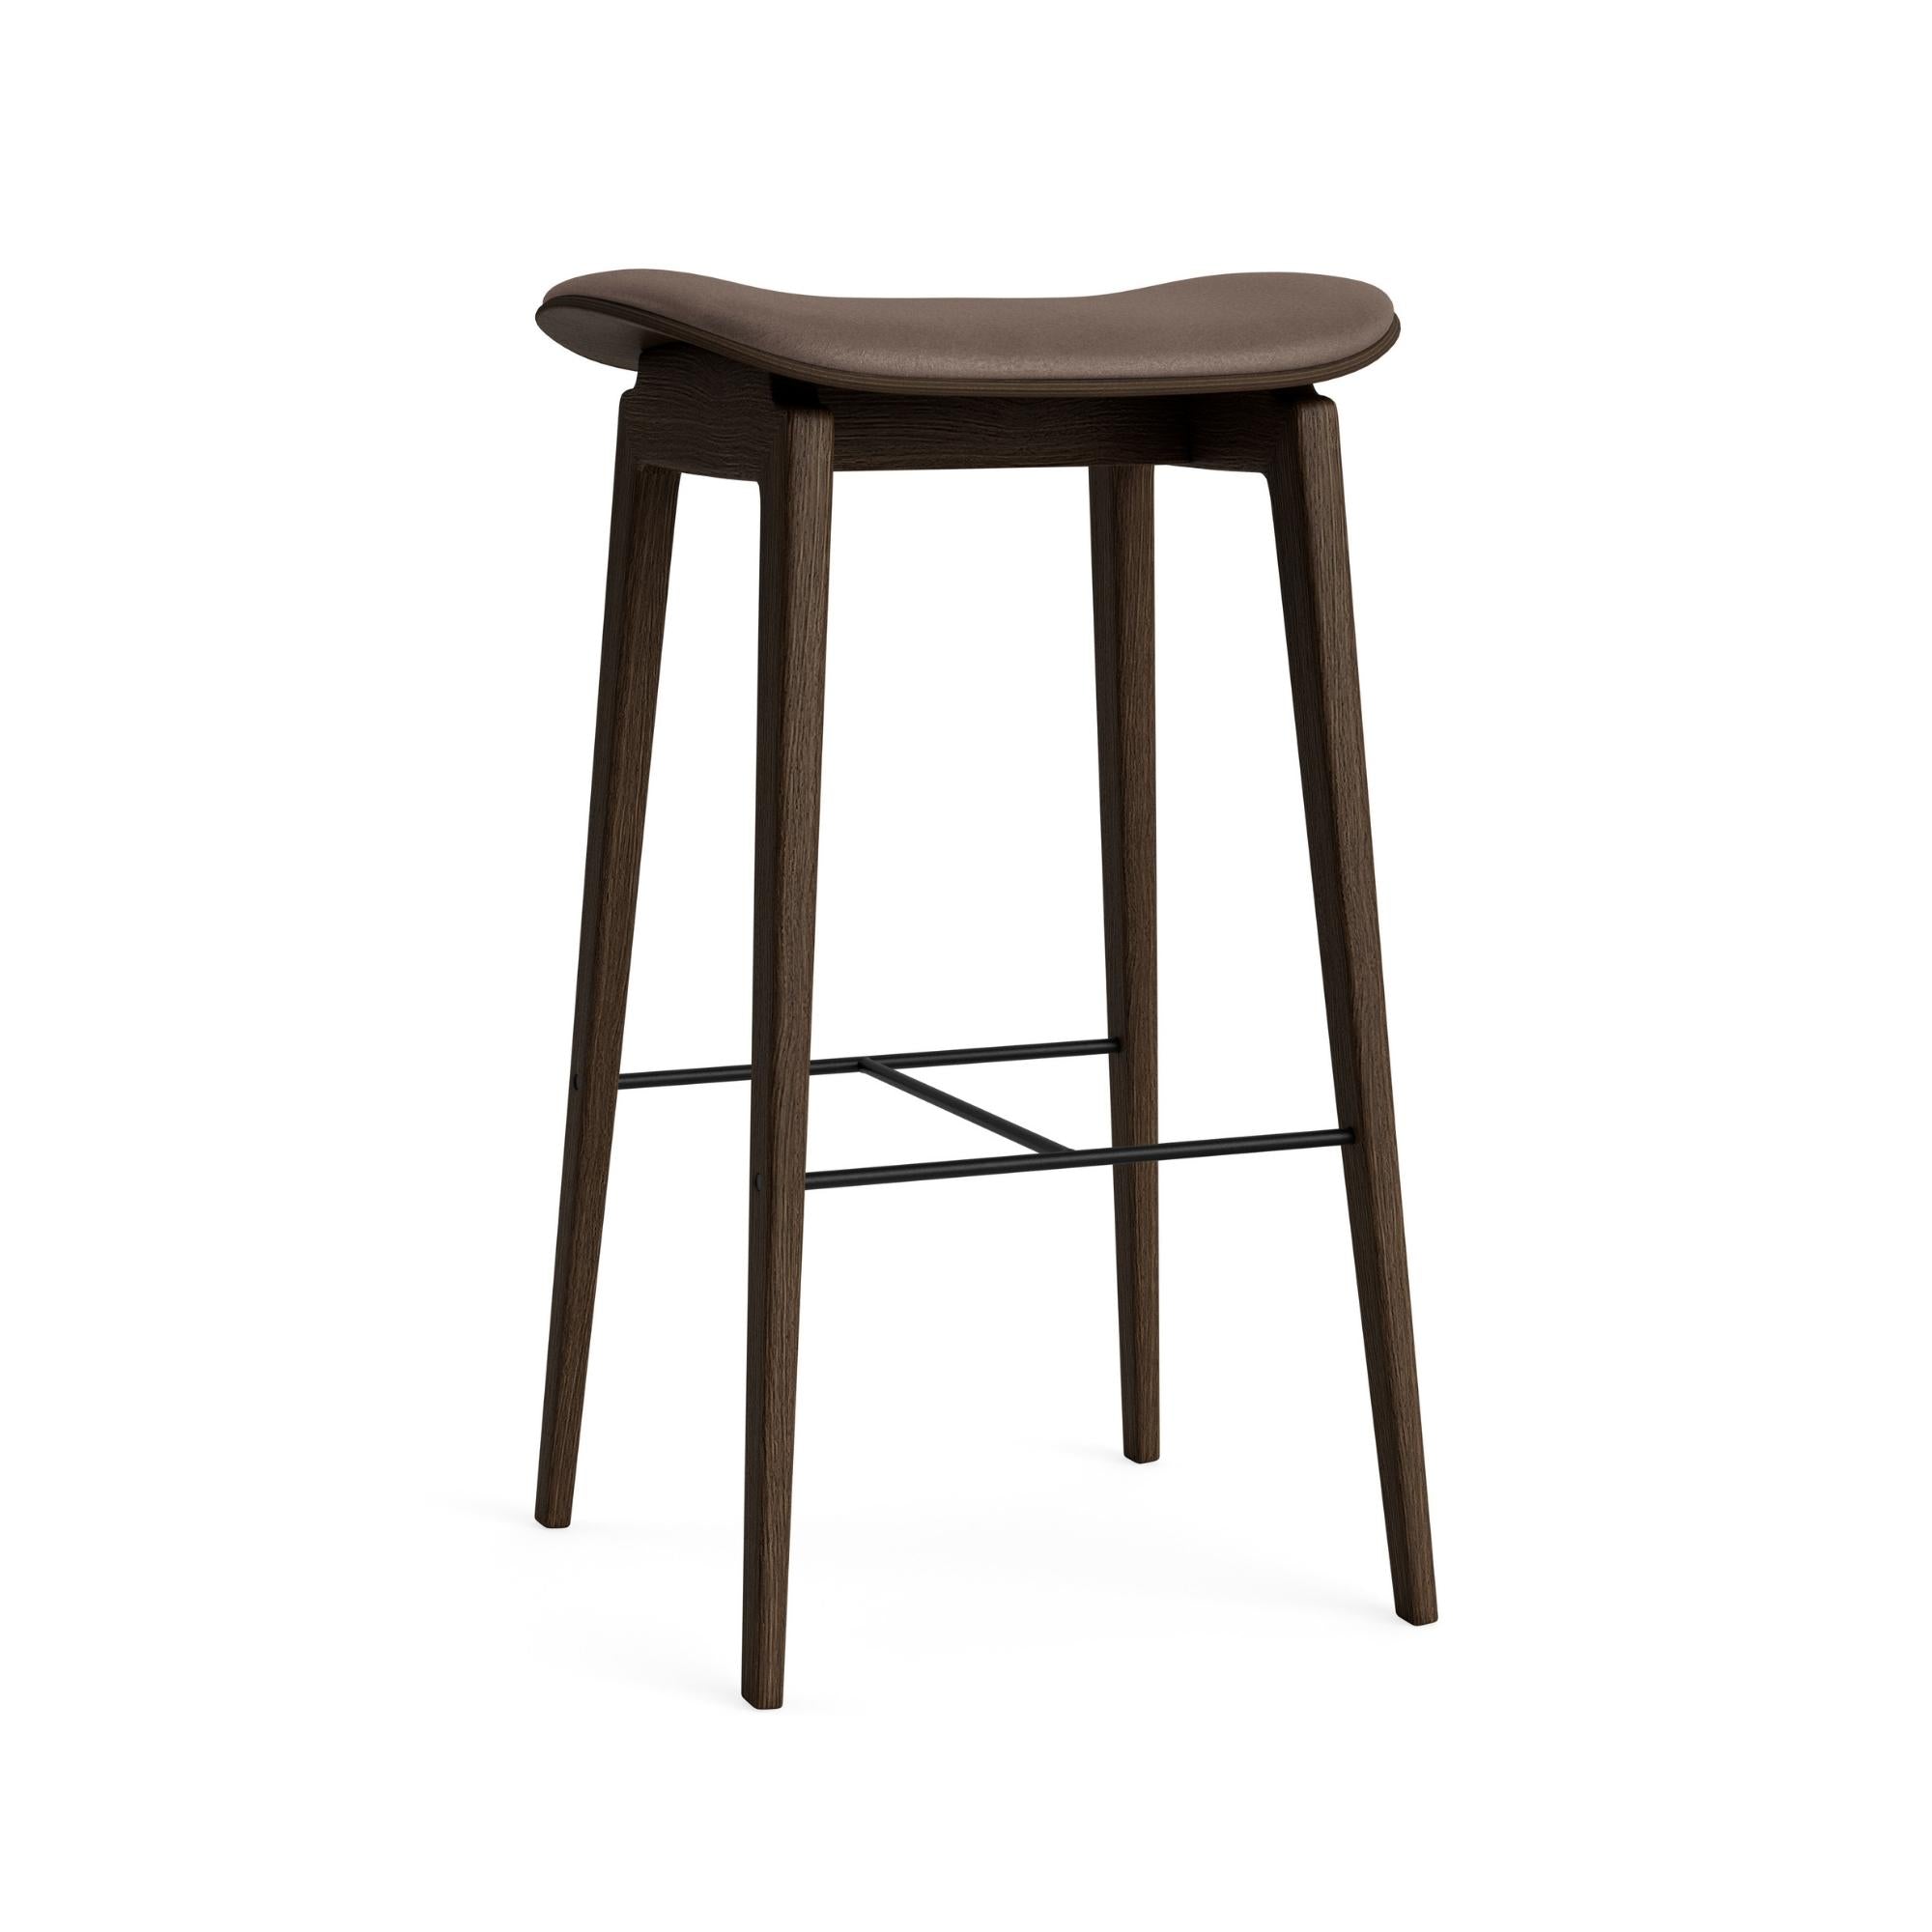 NY11 Bar stool - Leather - THAT COOL LIVING